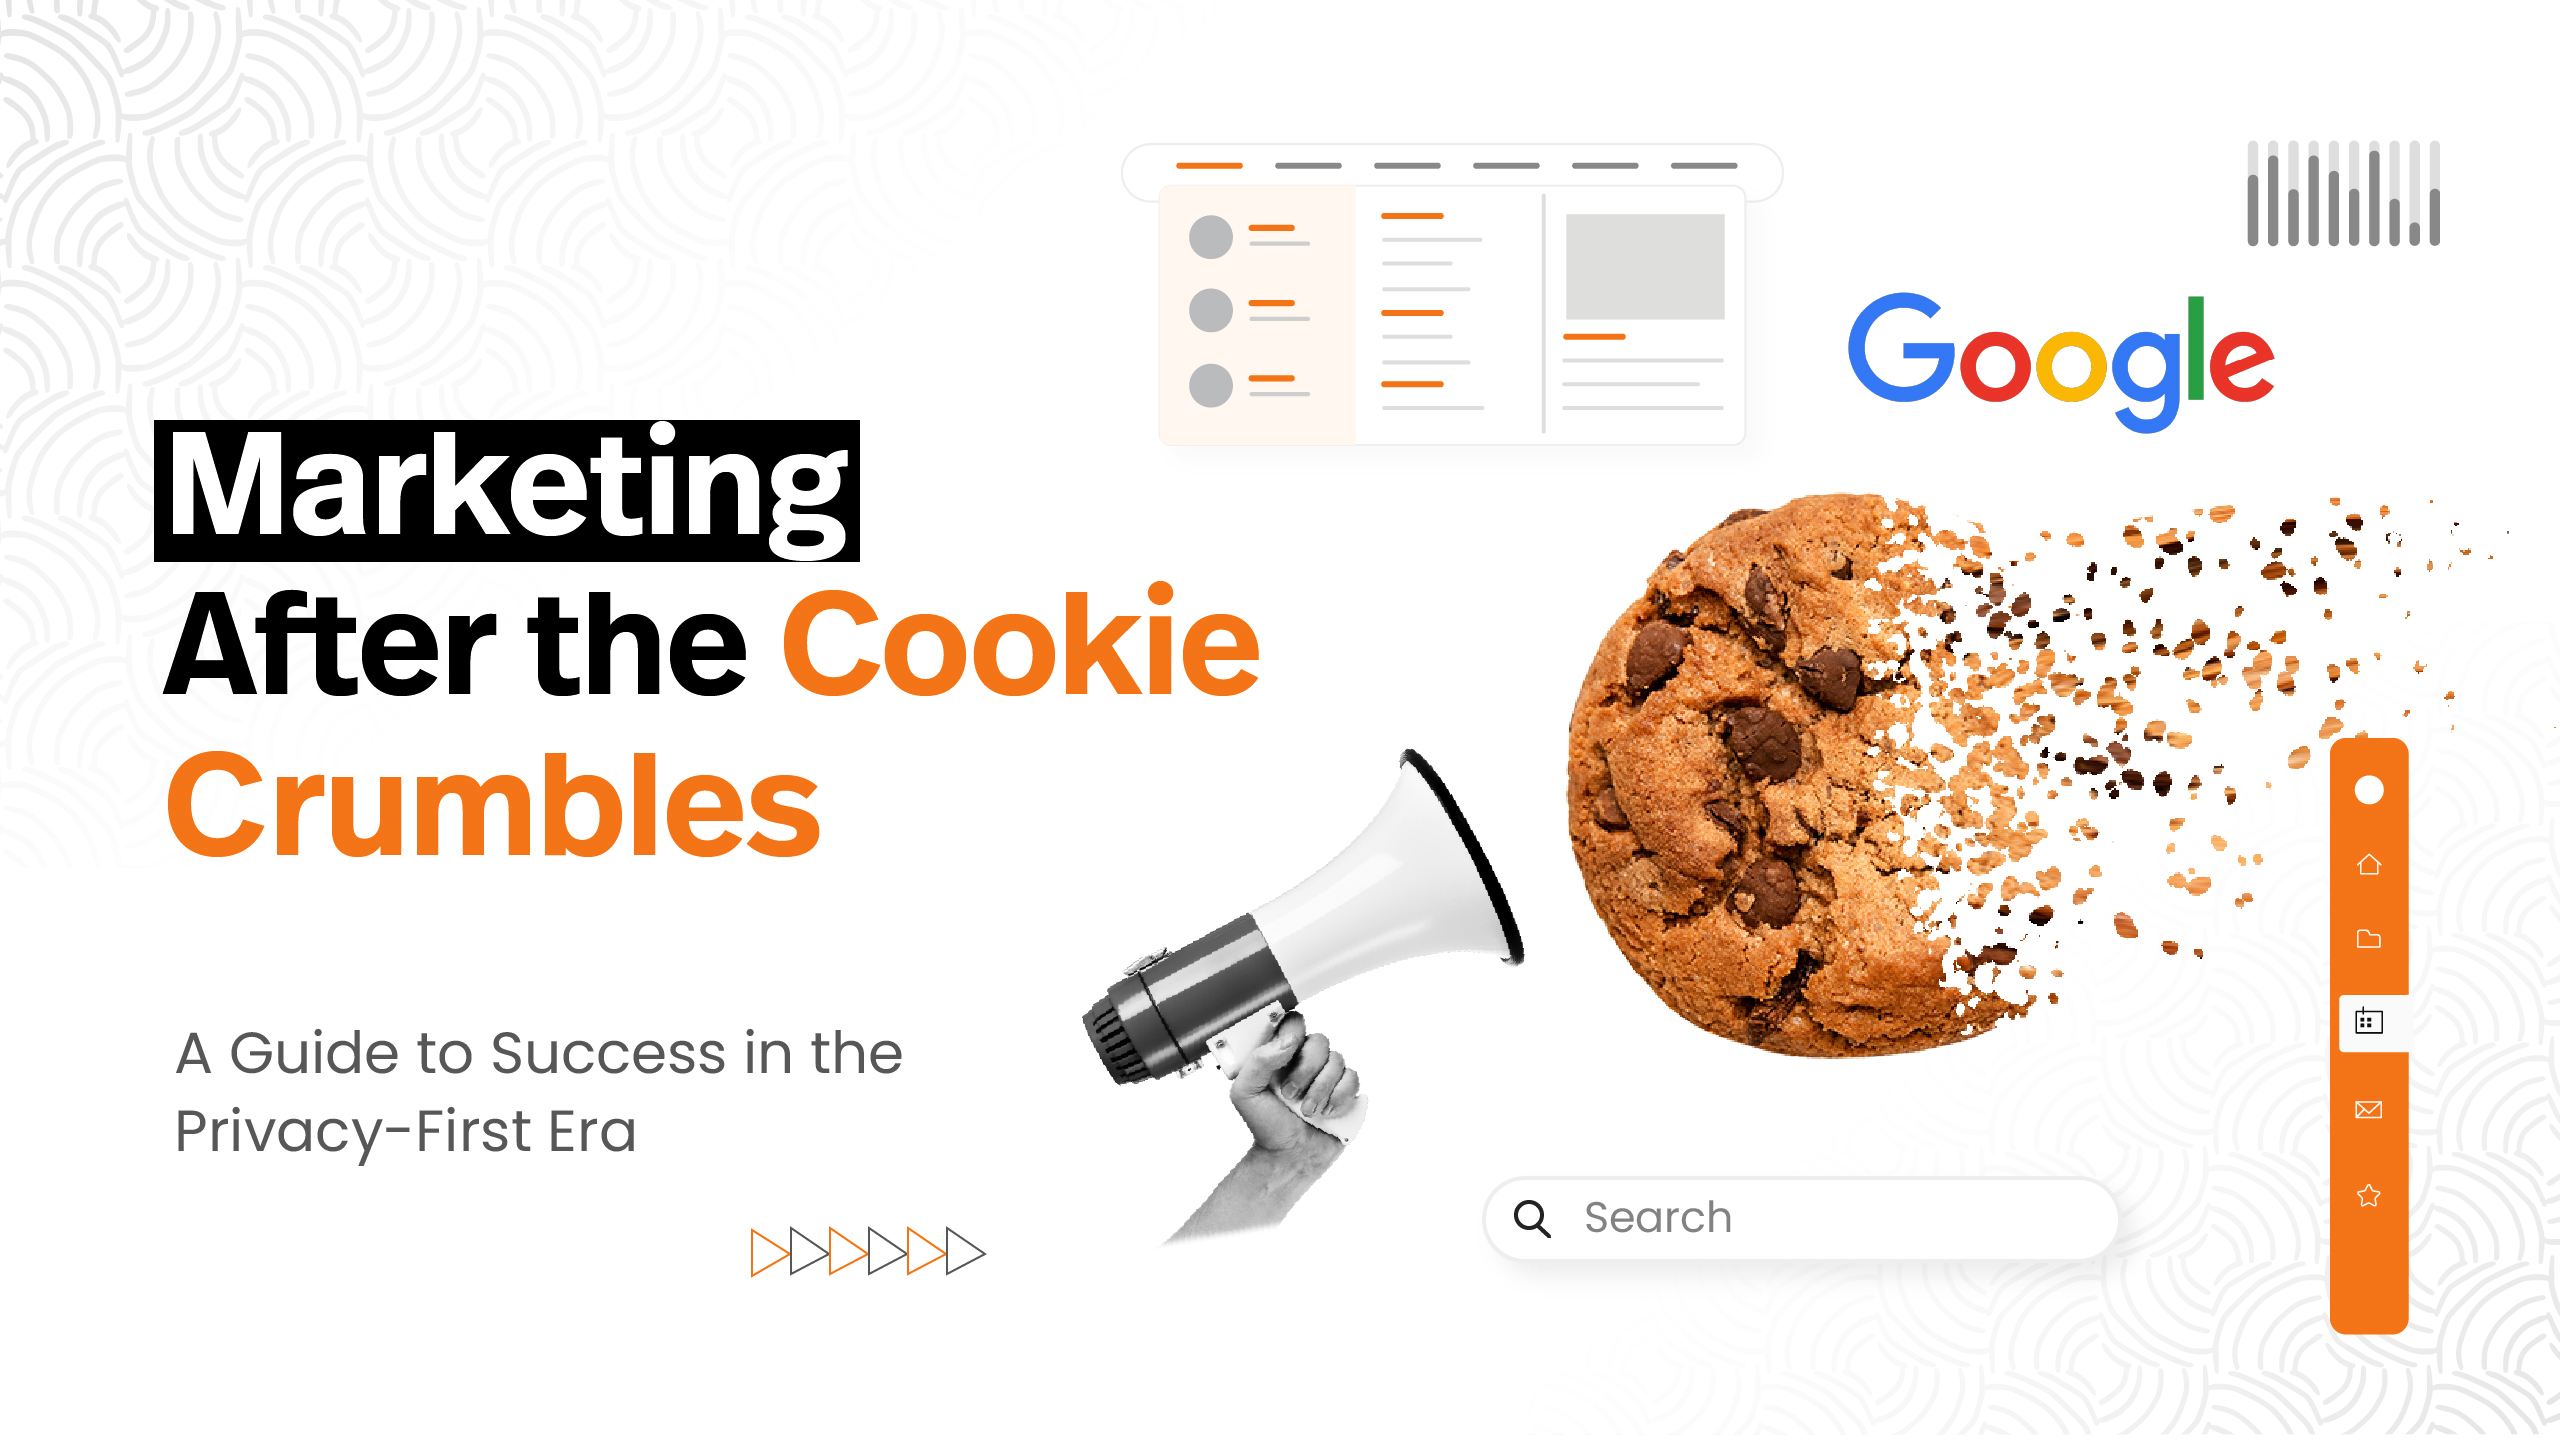 Marketing After the Cookie Crumbles: A Guide to Success in the Privacy-First Era